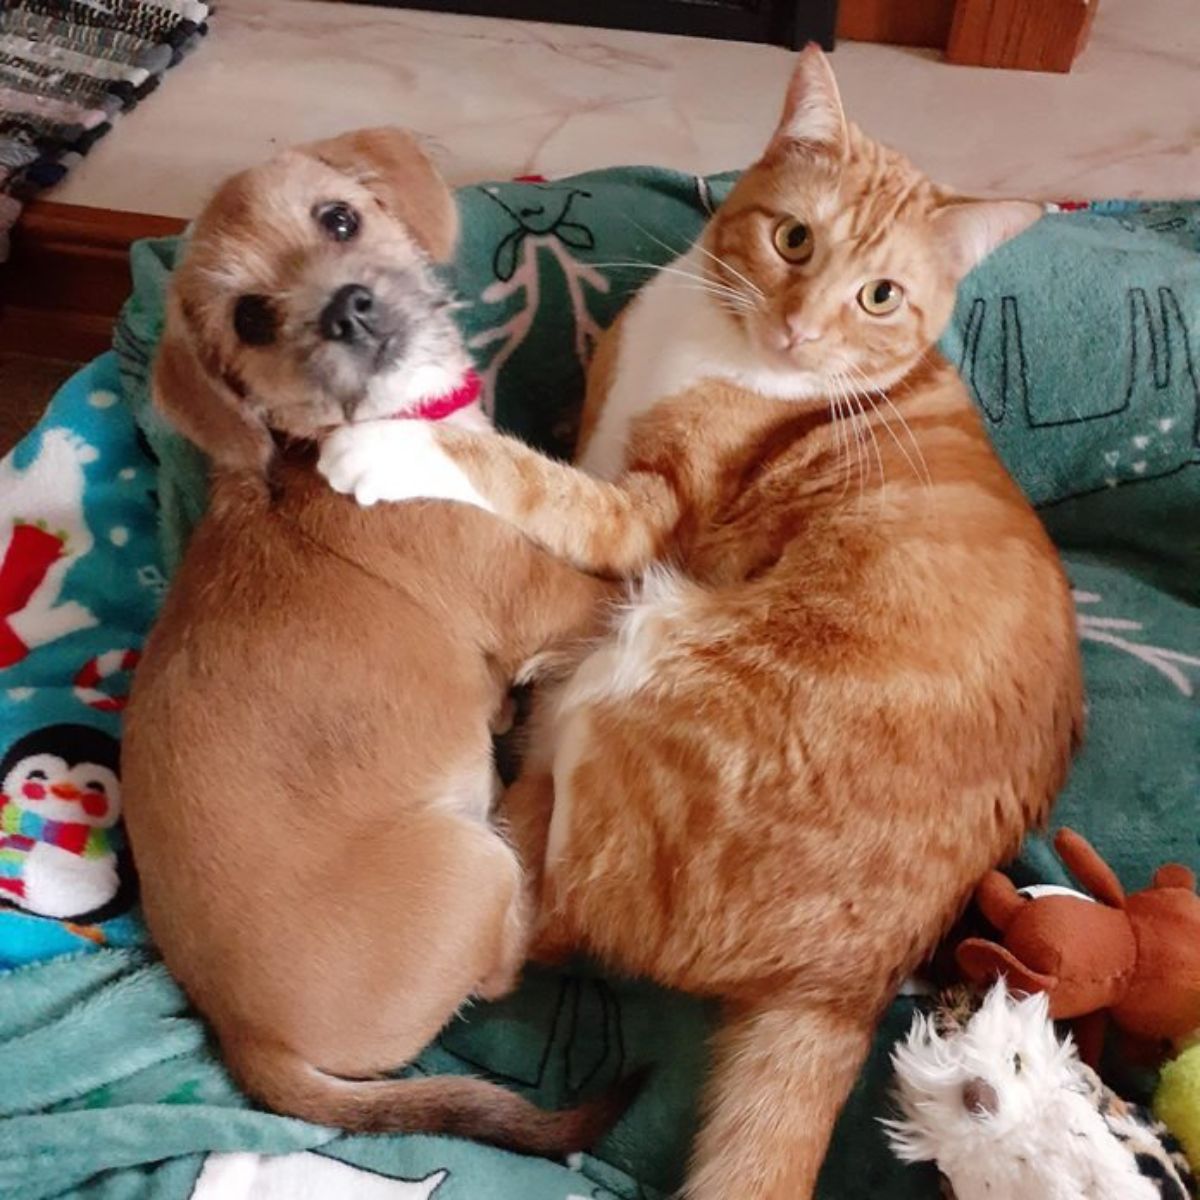 brown and white puppy laying on a christmas themed blanket next to an orange and white cat who has a paw on the puppy's shoulder